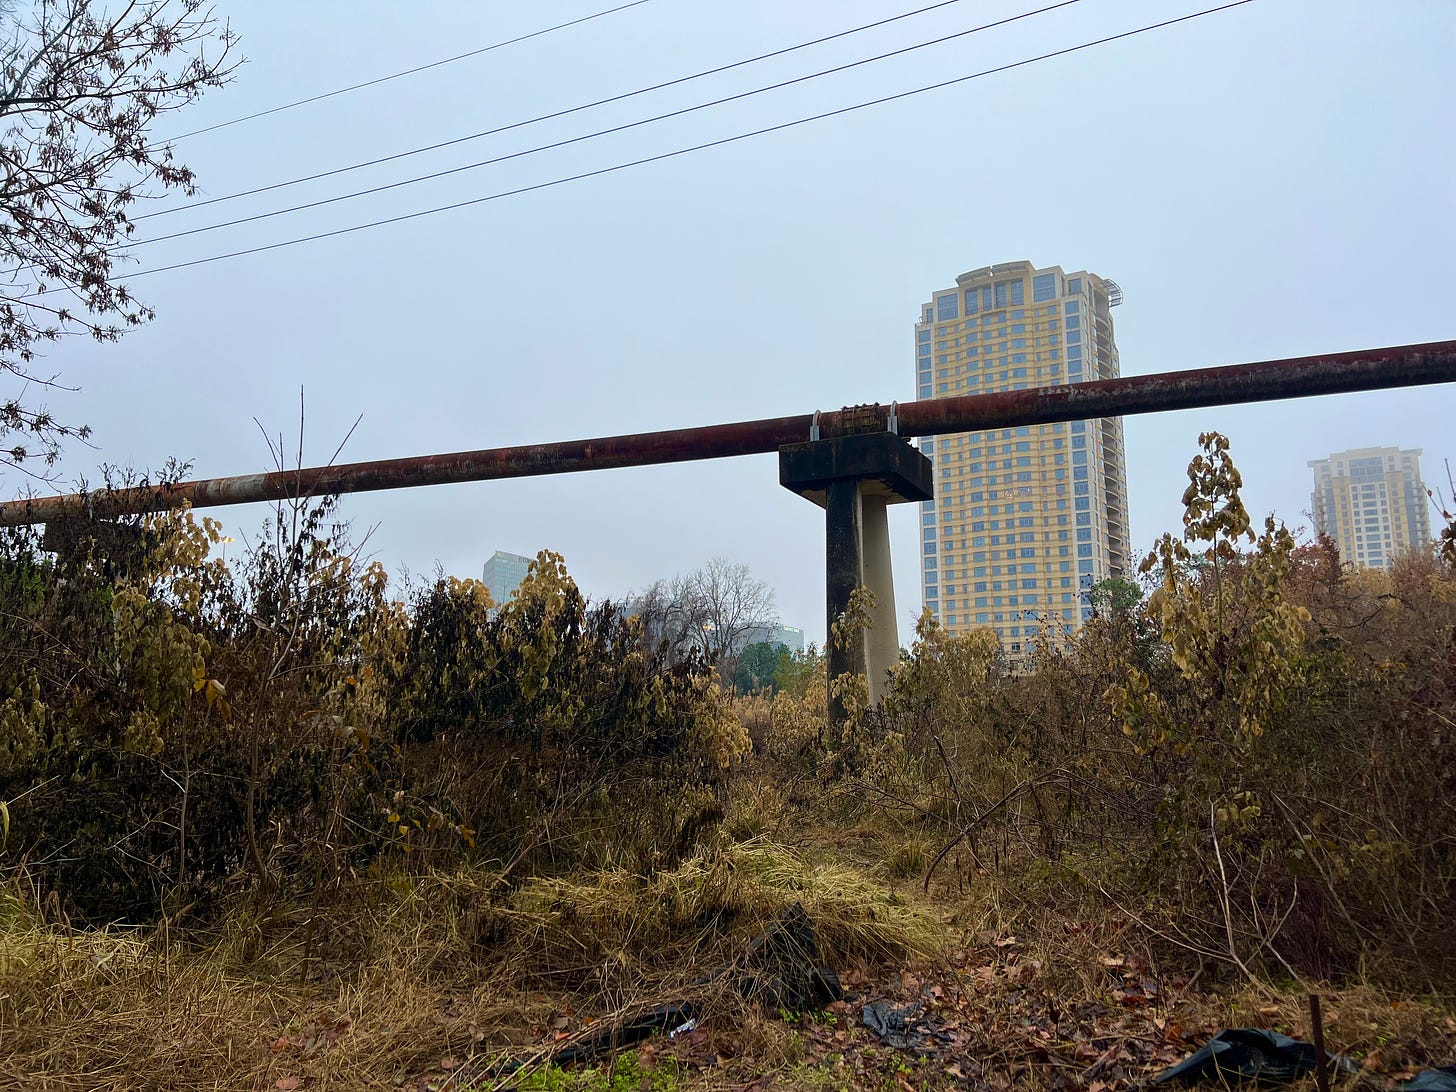 Color photo of Houston landscape: green-brown foliage in foreground, at the base of an elevated pipeline crossing the frame, power lines overhead, and two high rises in the background